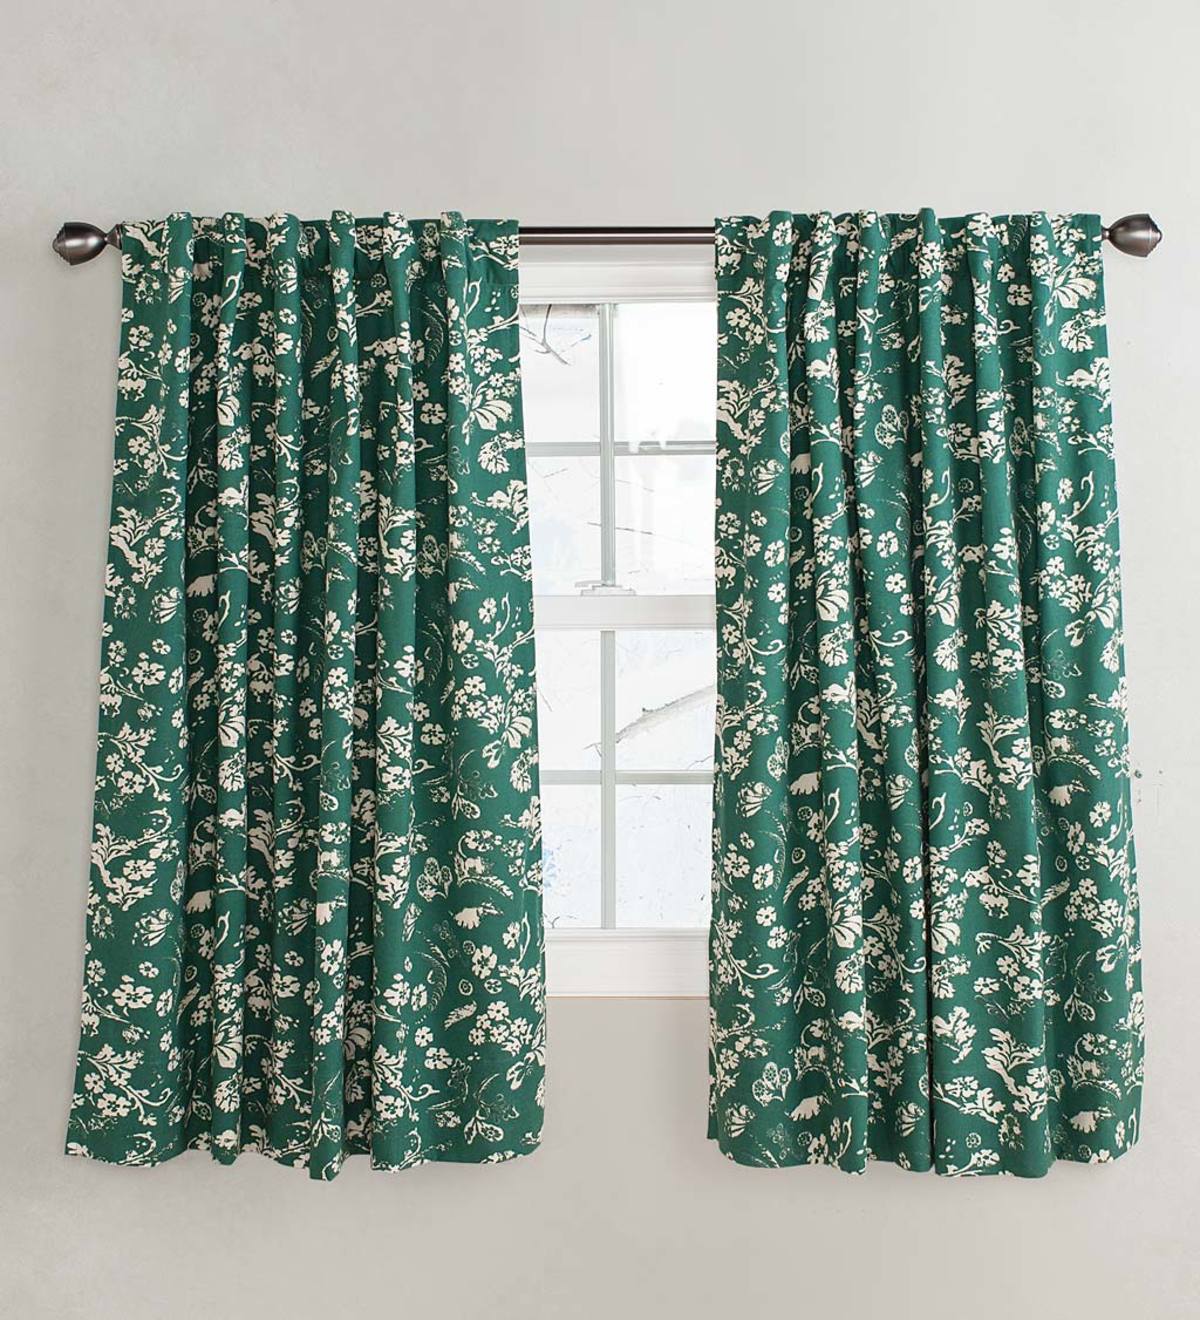 Homespun Insulated Floral Damask Short Panel with Rod Pocket